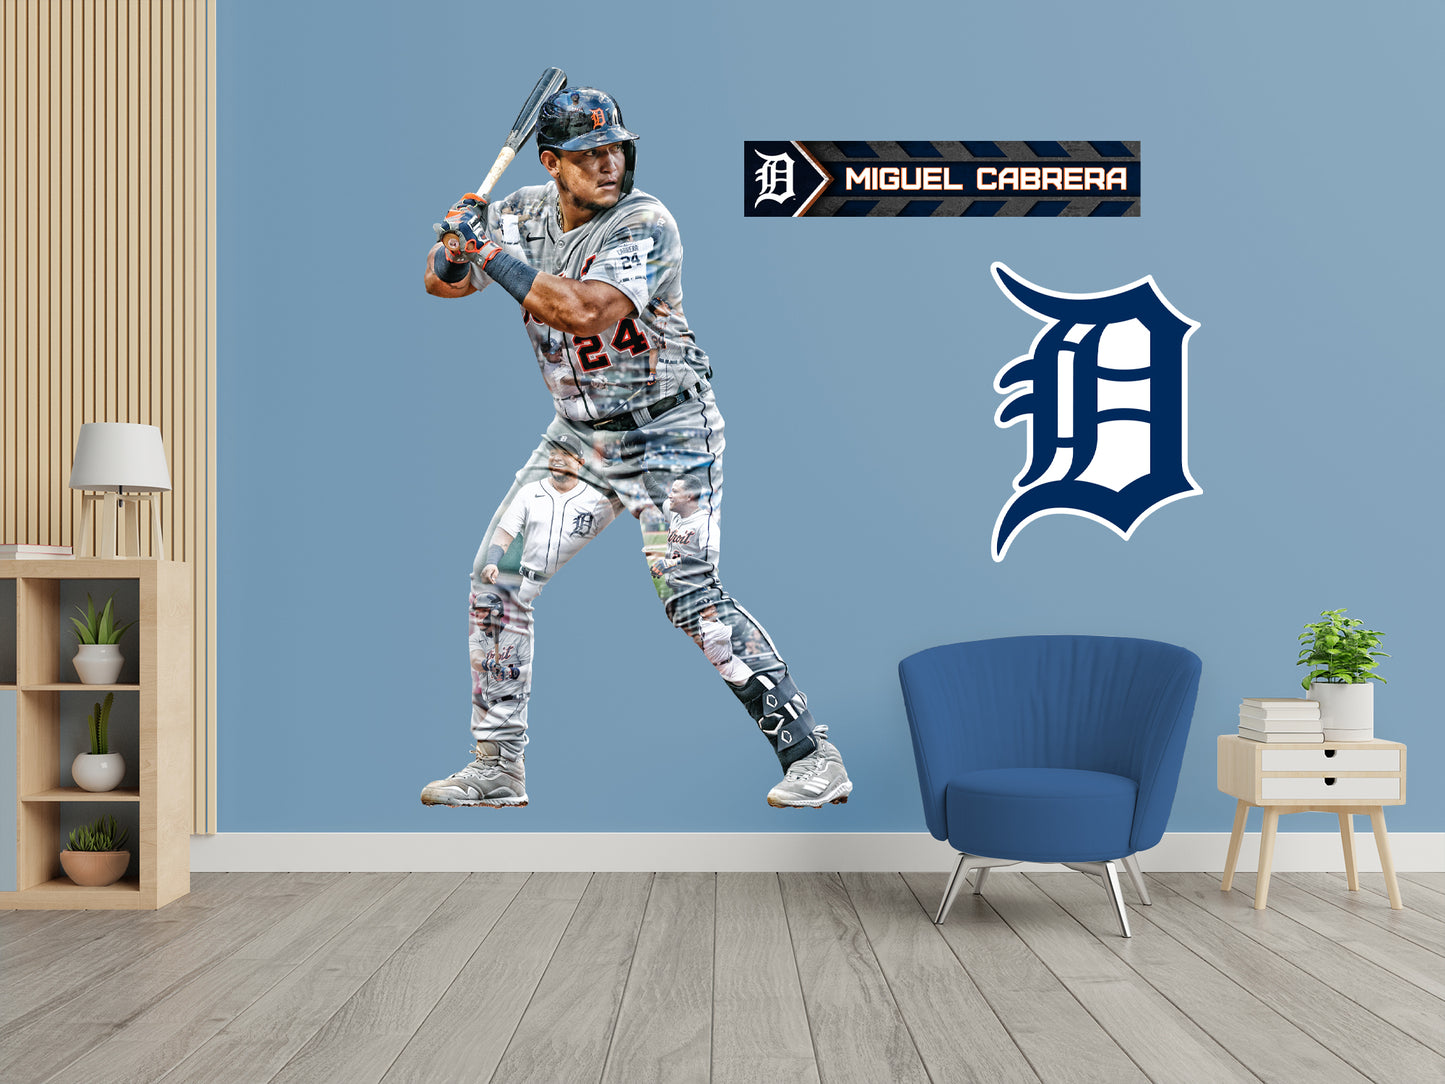 Detroit Tigers: Miguel Cabrera LIMITED EDITION ELITE - Officially Licensed MLB Removable Adhesive Decal